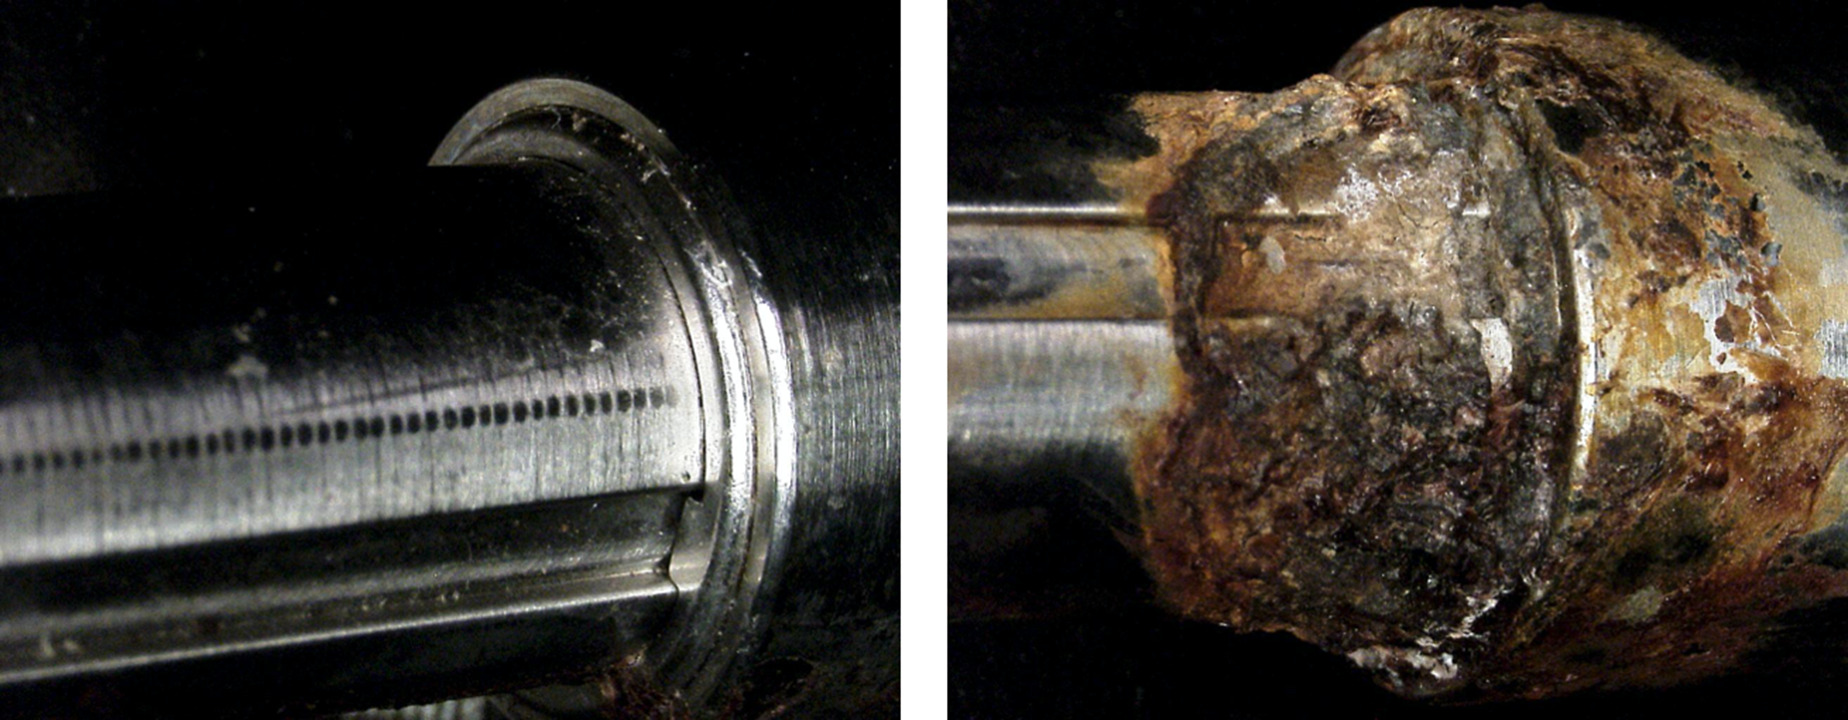 Fig. 6 
            Microscopic images of the extendable junctions of the femoral nails retrieved from patient 2 after 13 months in situ. The left image is of the left nail, showing minimal unexpected surface damage. The right image is of the right nail, showing evidence of severe corrosion (Goldberg score 4). The left image also shows black marks and slight galling, corresponding to the incremental lengthening of the nails. The patient had no symptoms of pain; however, there was evidence of cortical thickening at the extendable junction of the right nail.
          